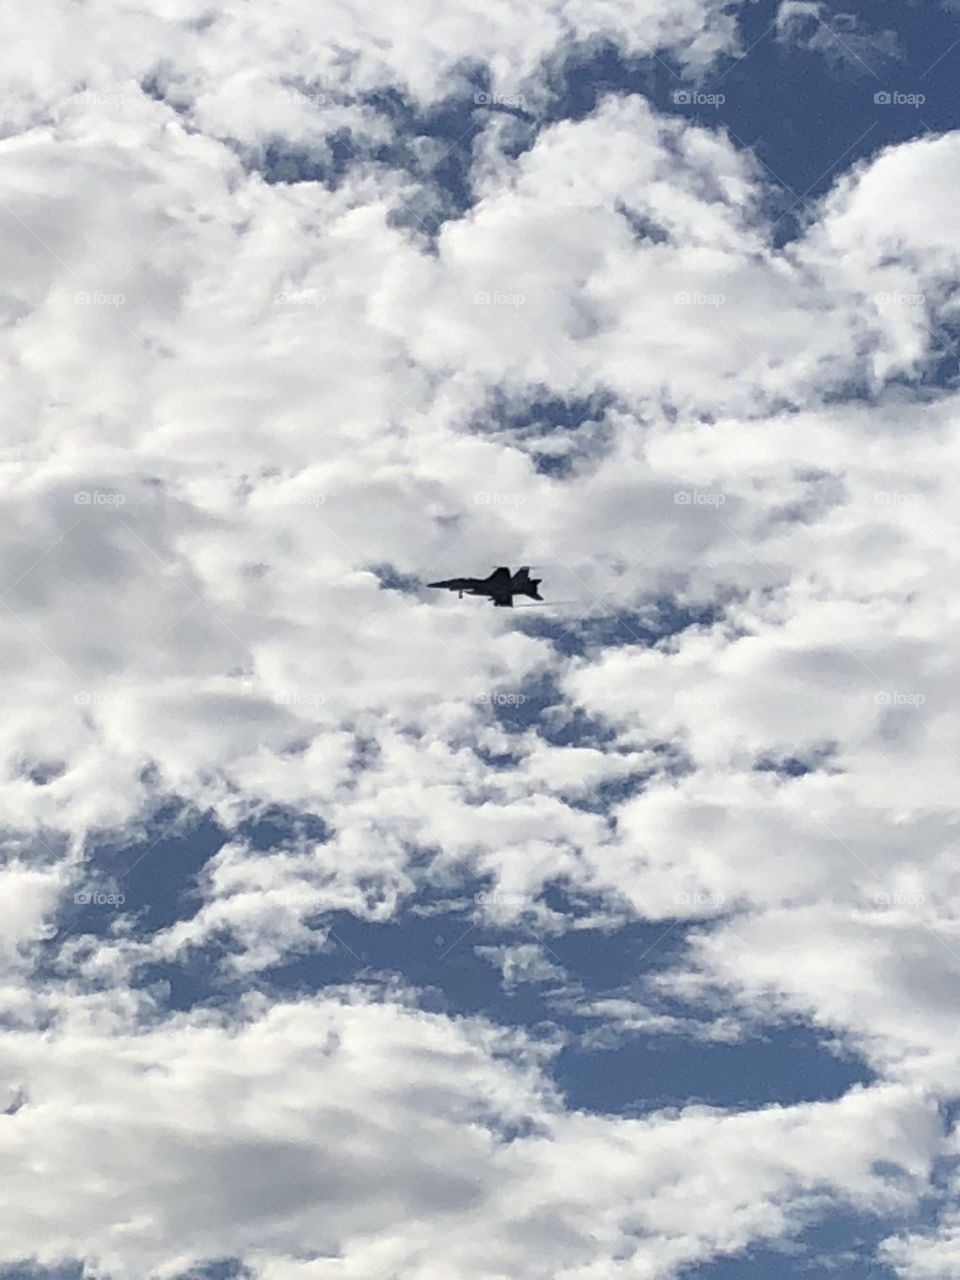 Jet flying through cloudy blue skies